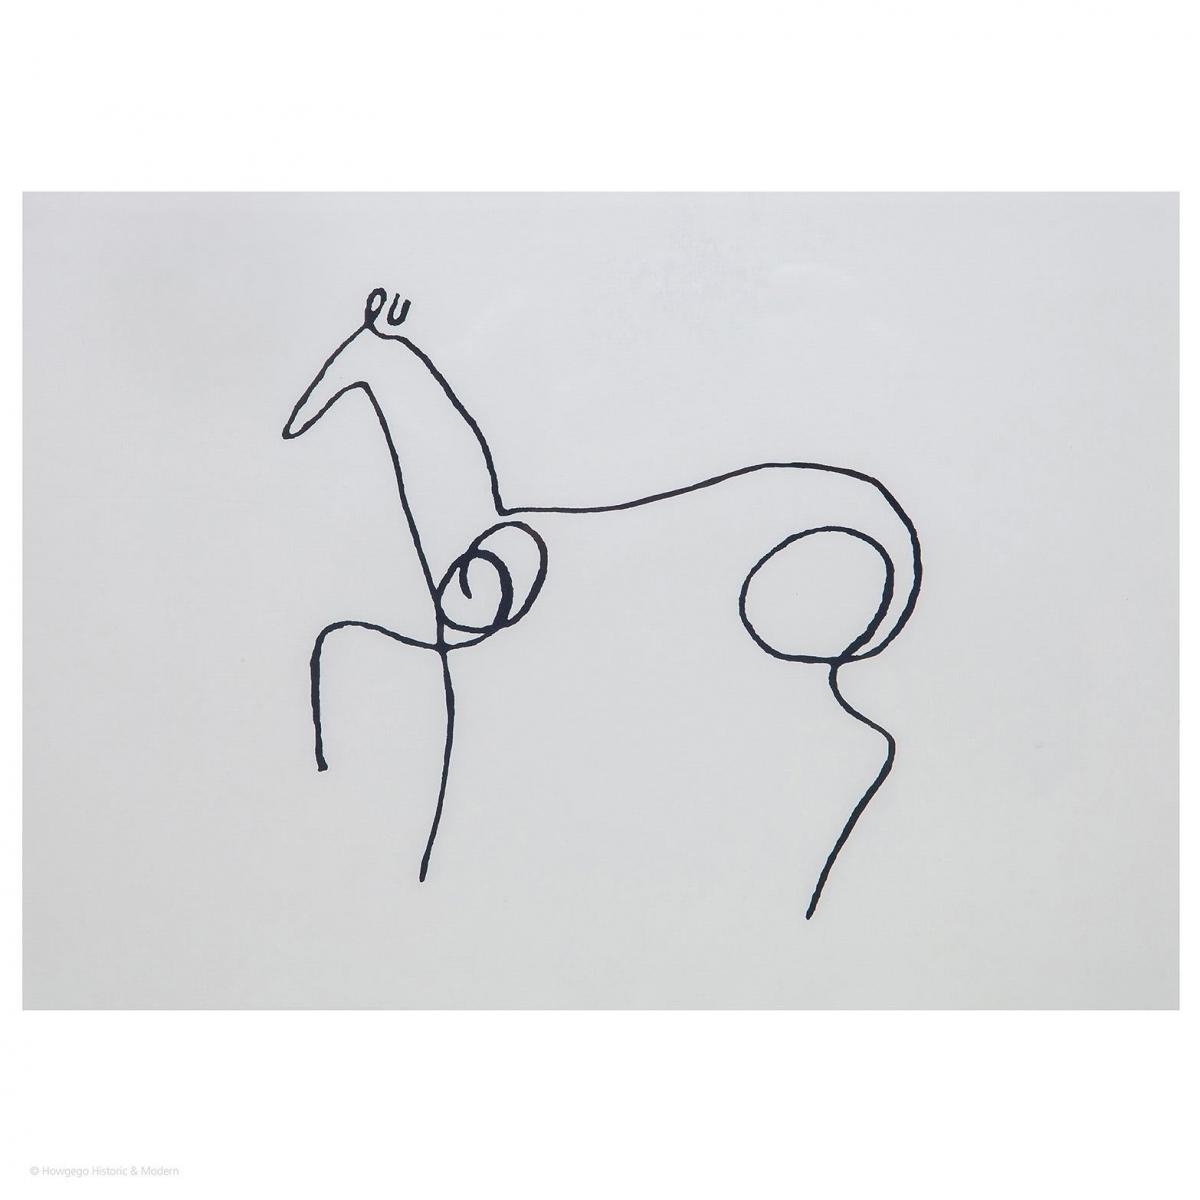 Set of 6 Picasso Line Drawings | BADA